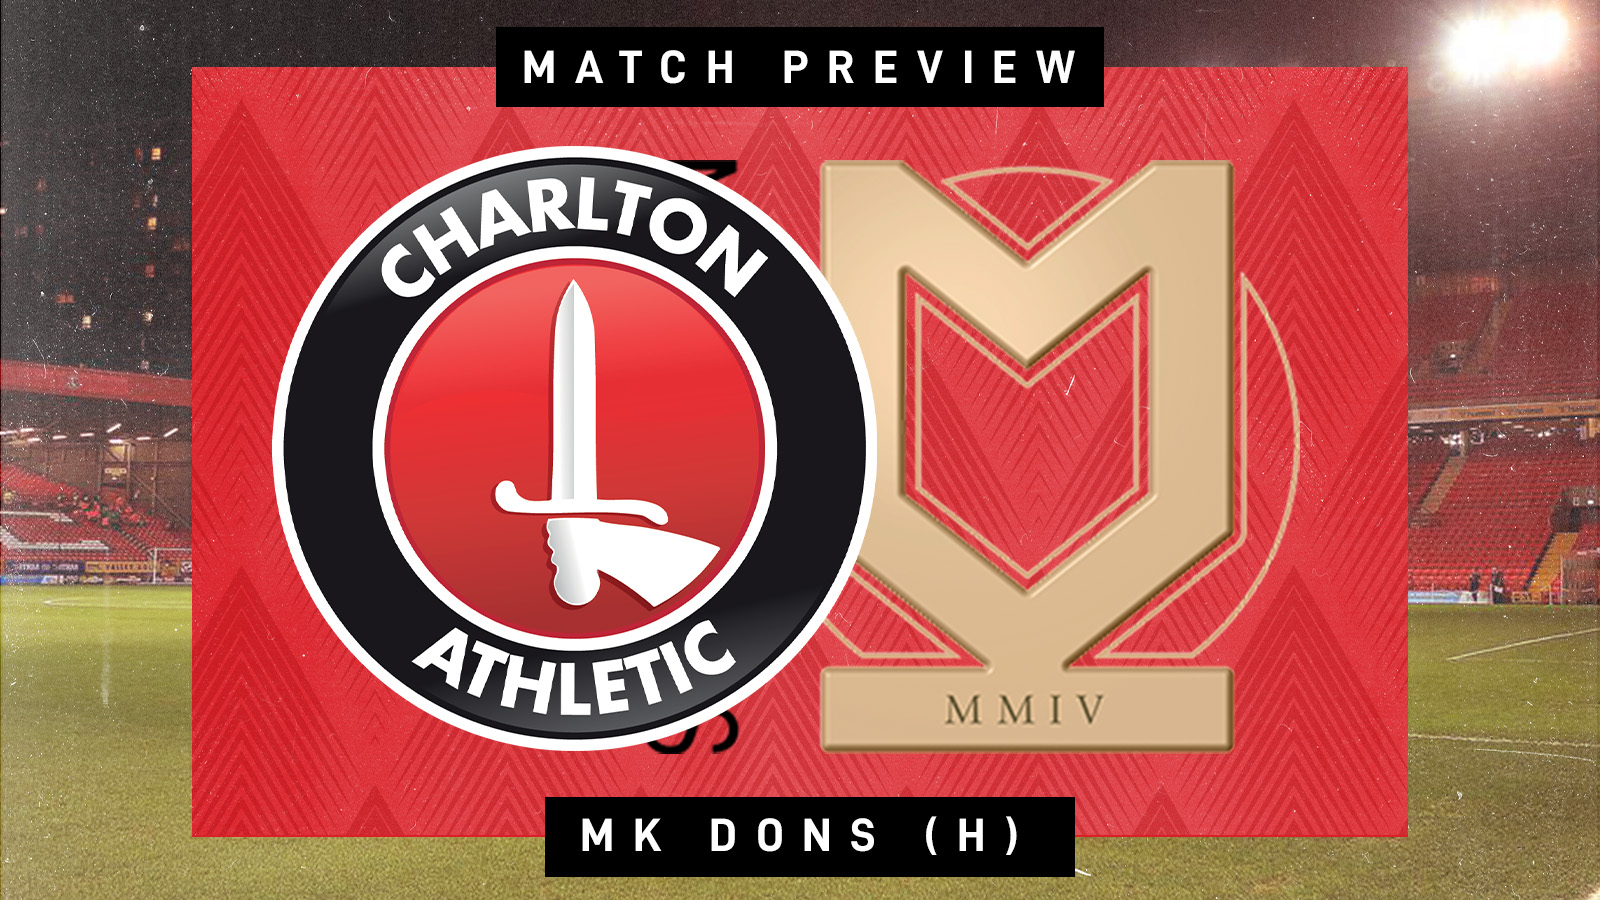 MK Dons preview